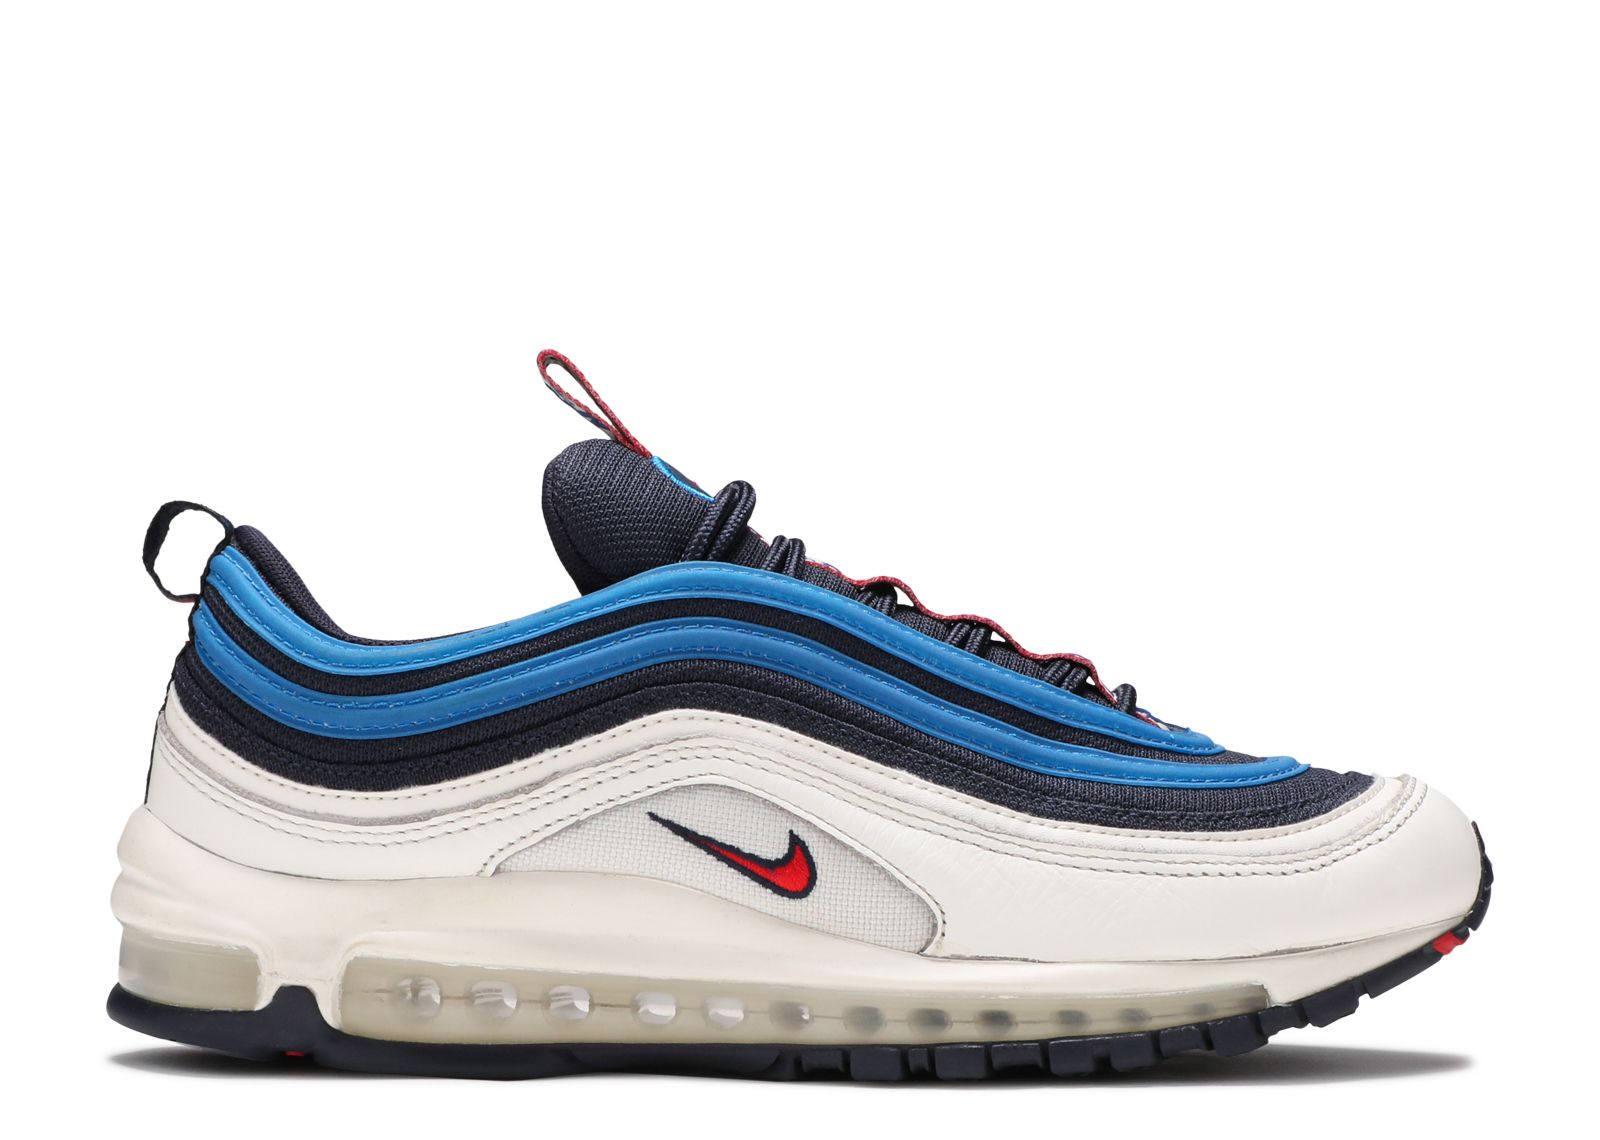 nike air max 97 se white blue red yellow